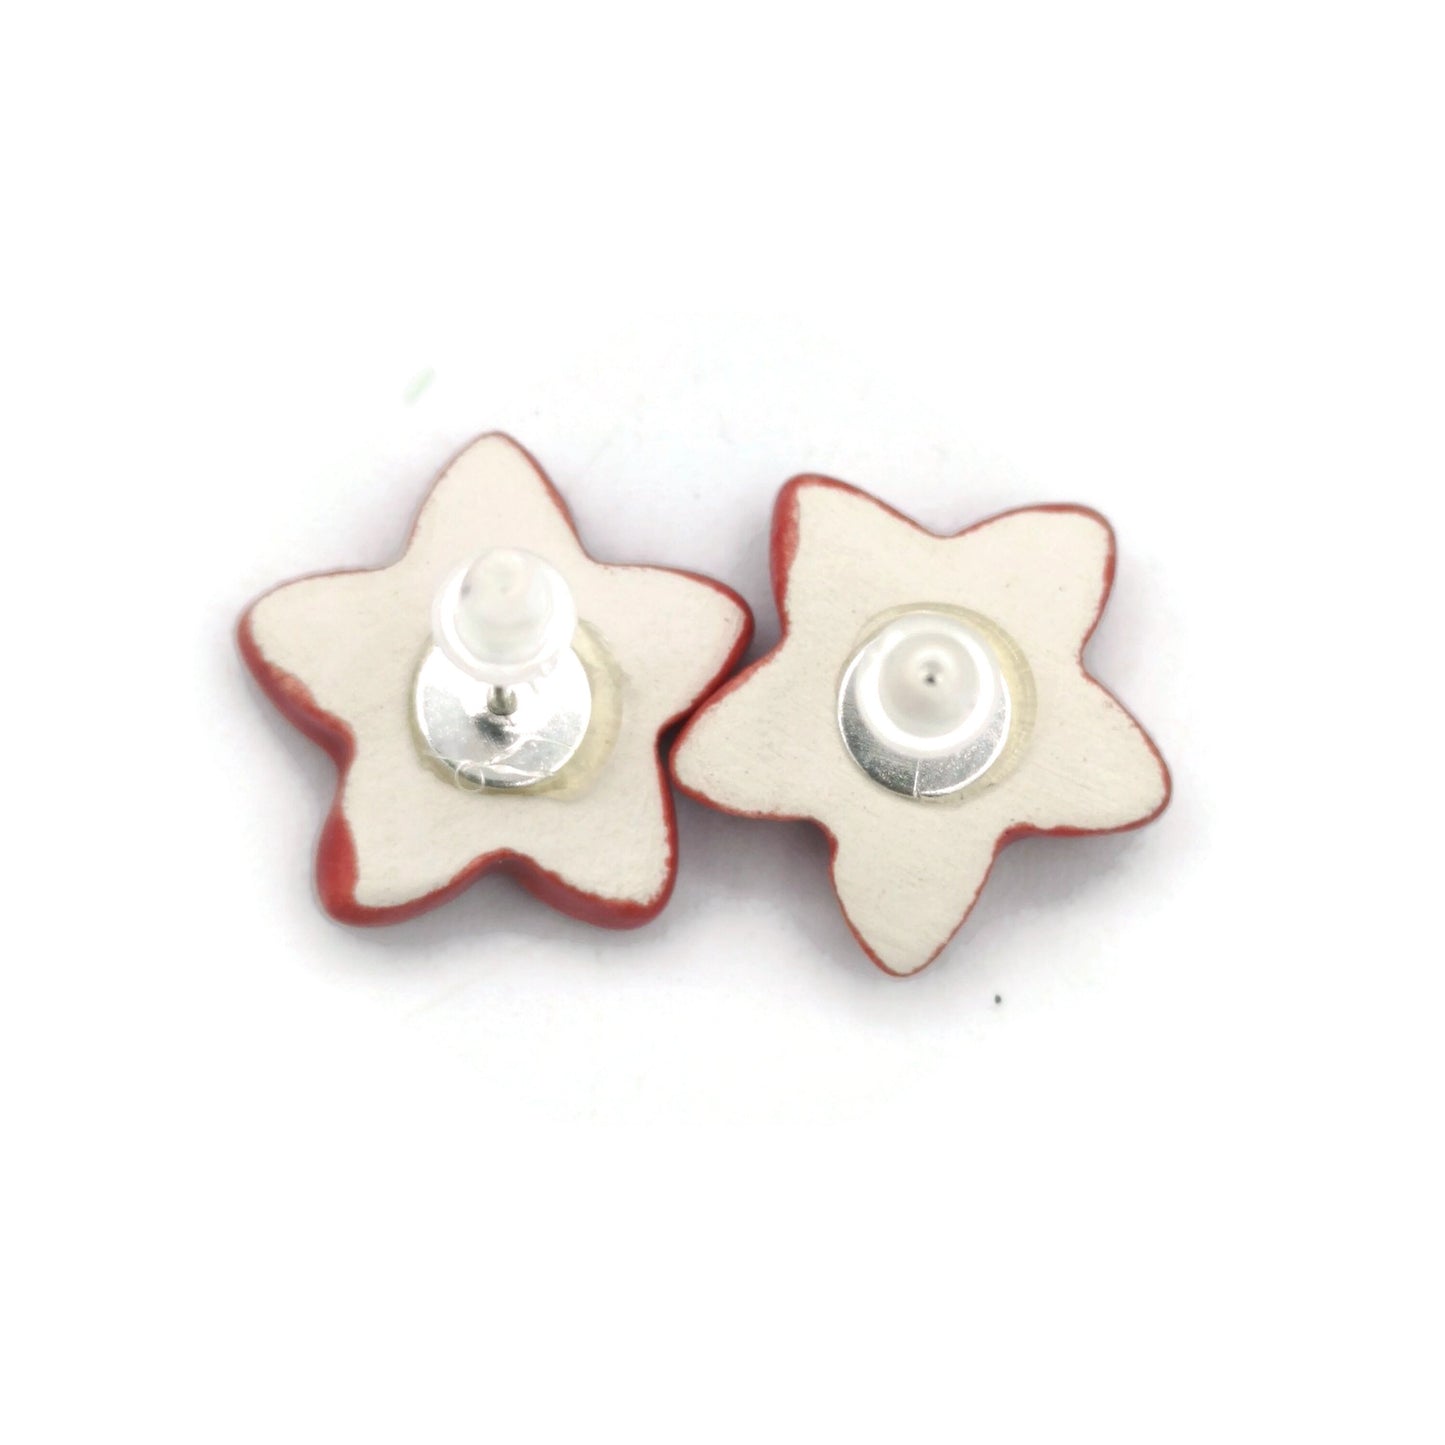 Set of 3 Star Stud Earrings For Women, Novelty Earrings, Best Gits For Her, Quirky Statement Jewelry, Cute Mom Birthday Gift From Daughter - Ceramica Ana Rafael